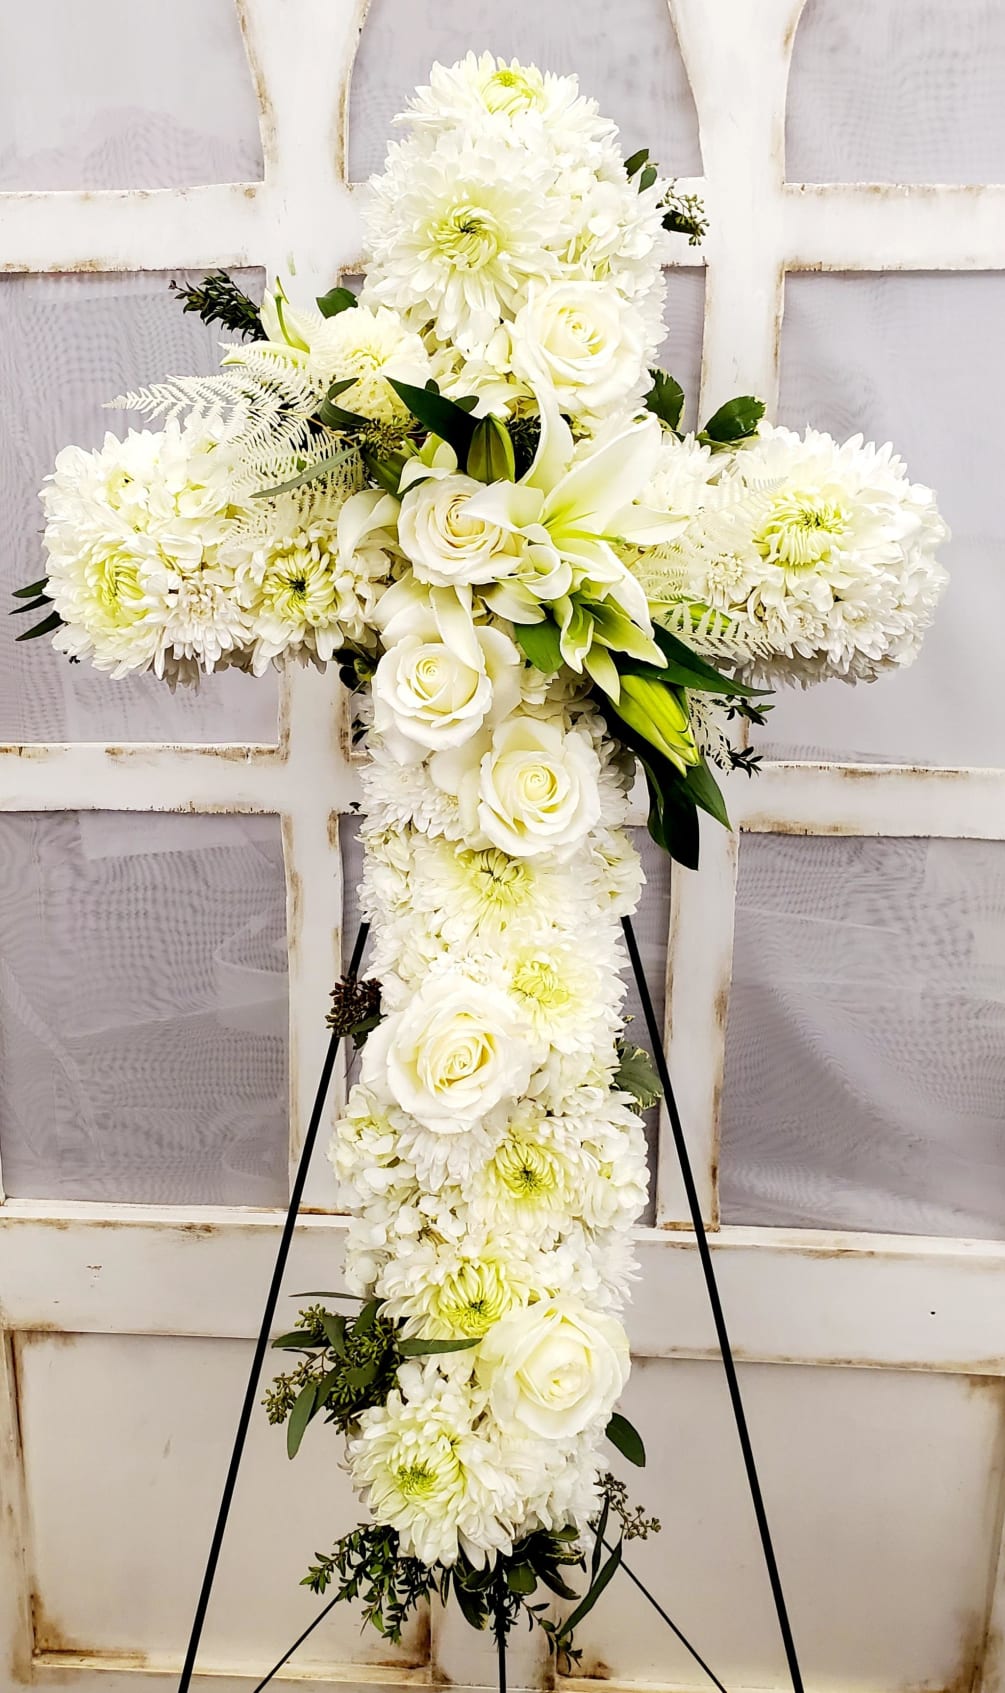 A pure white standing cross tribute created with roses, mums and lilies